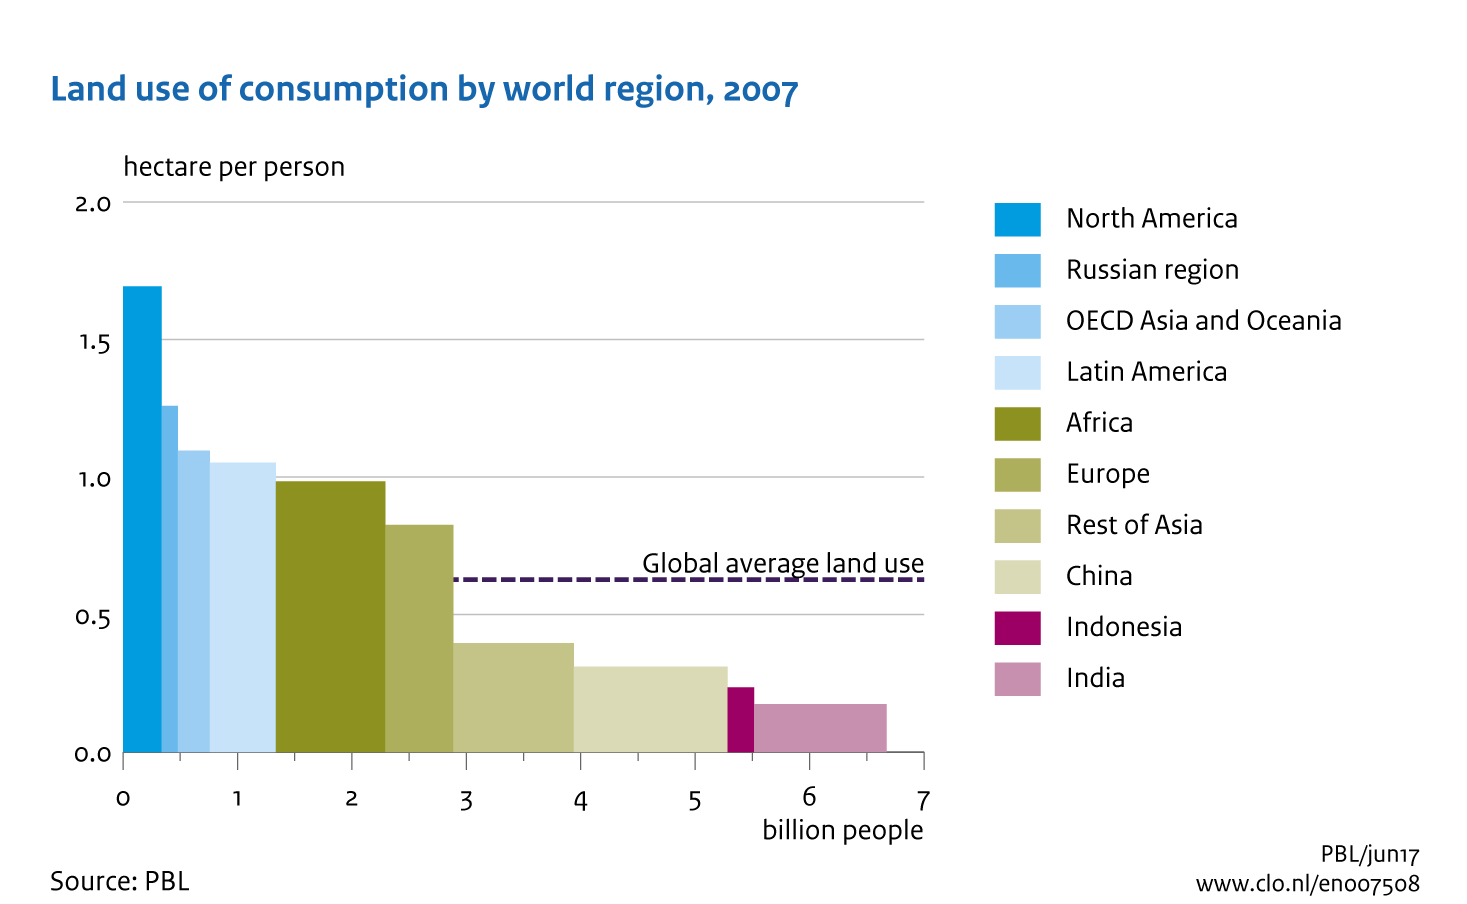 Image  Land use of consumption by world region,2007. The image is further explained in the text.